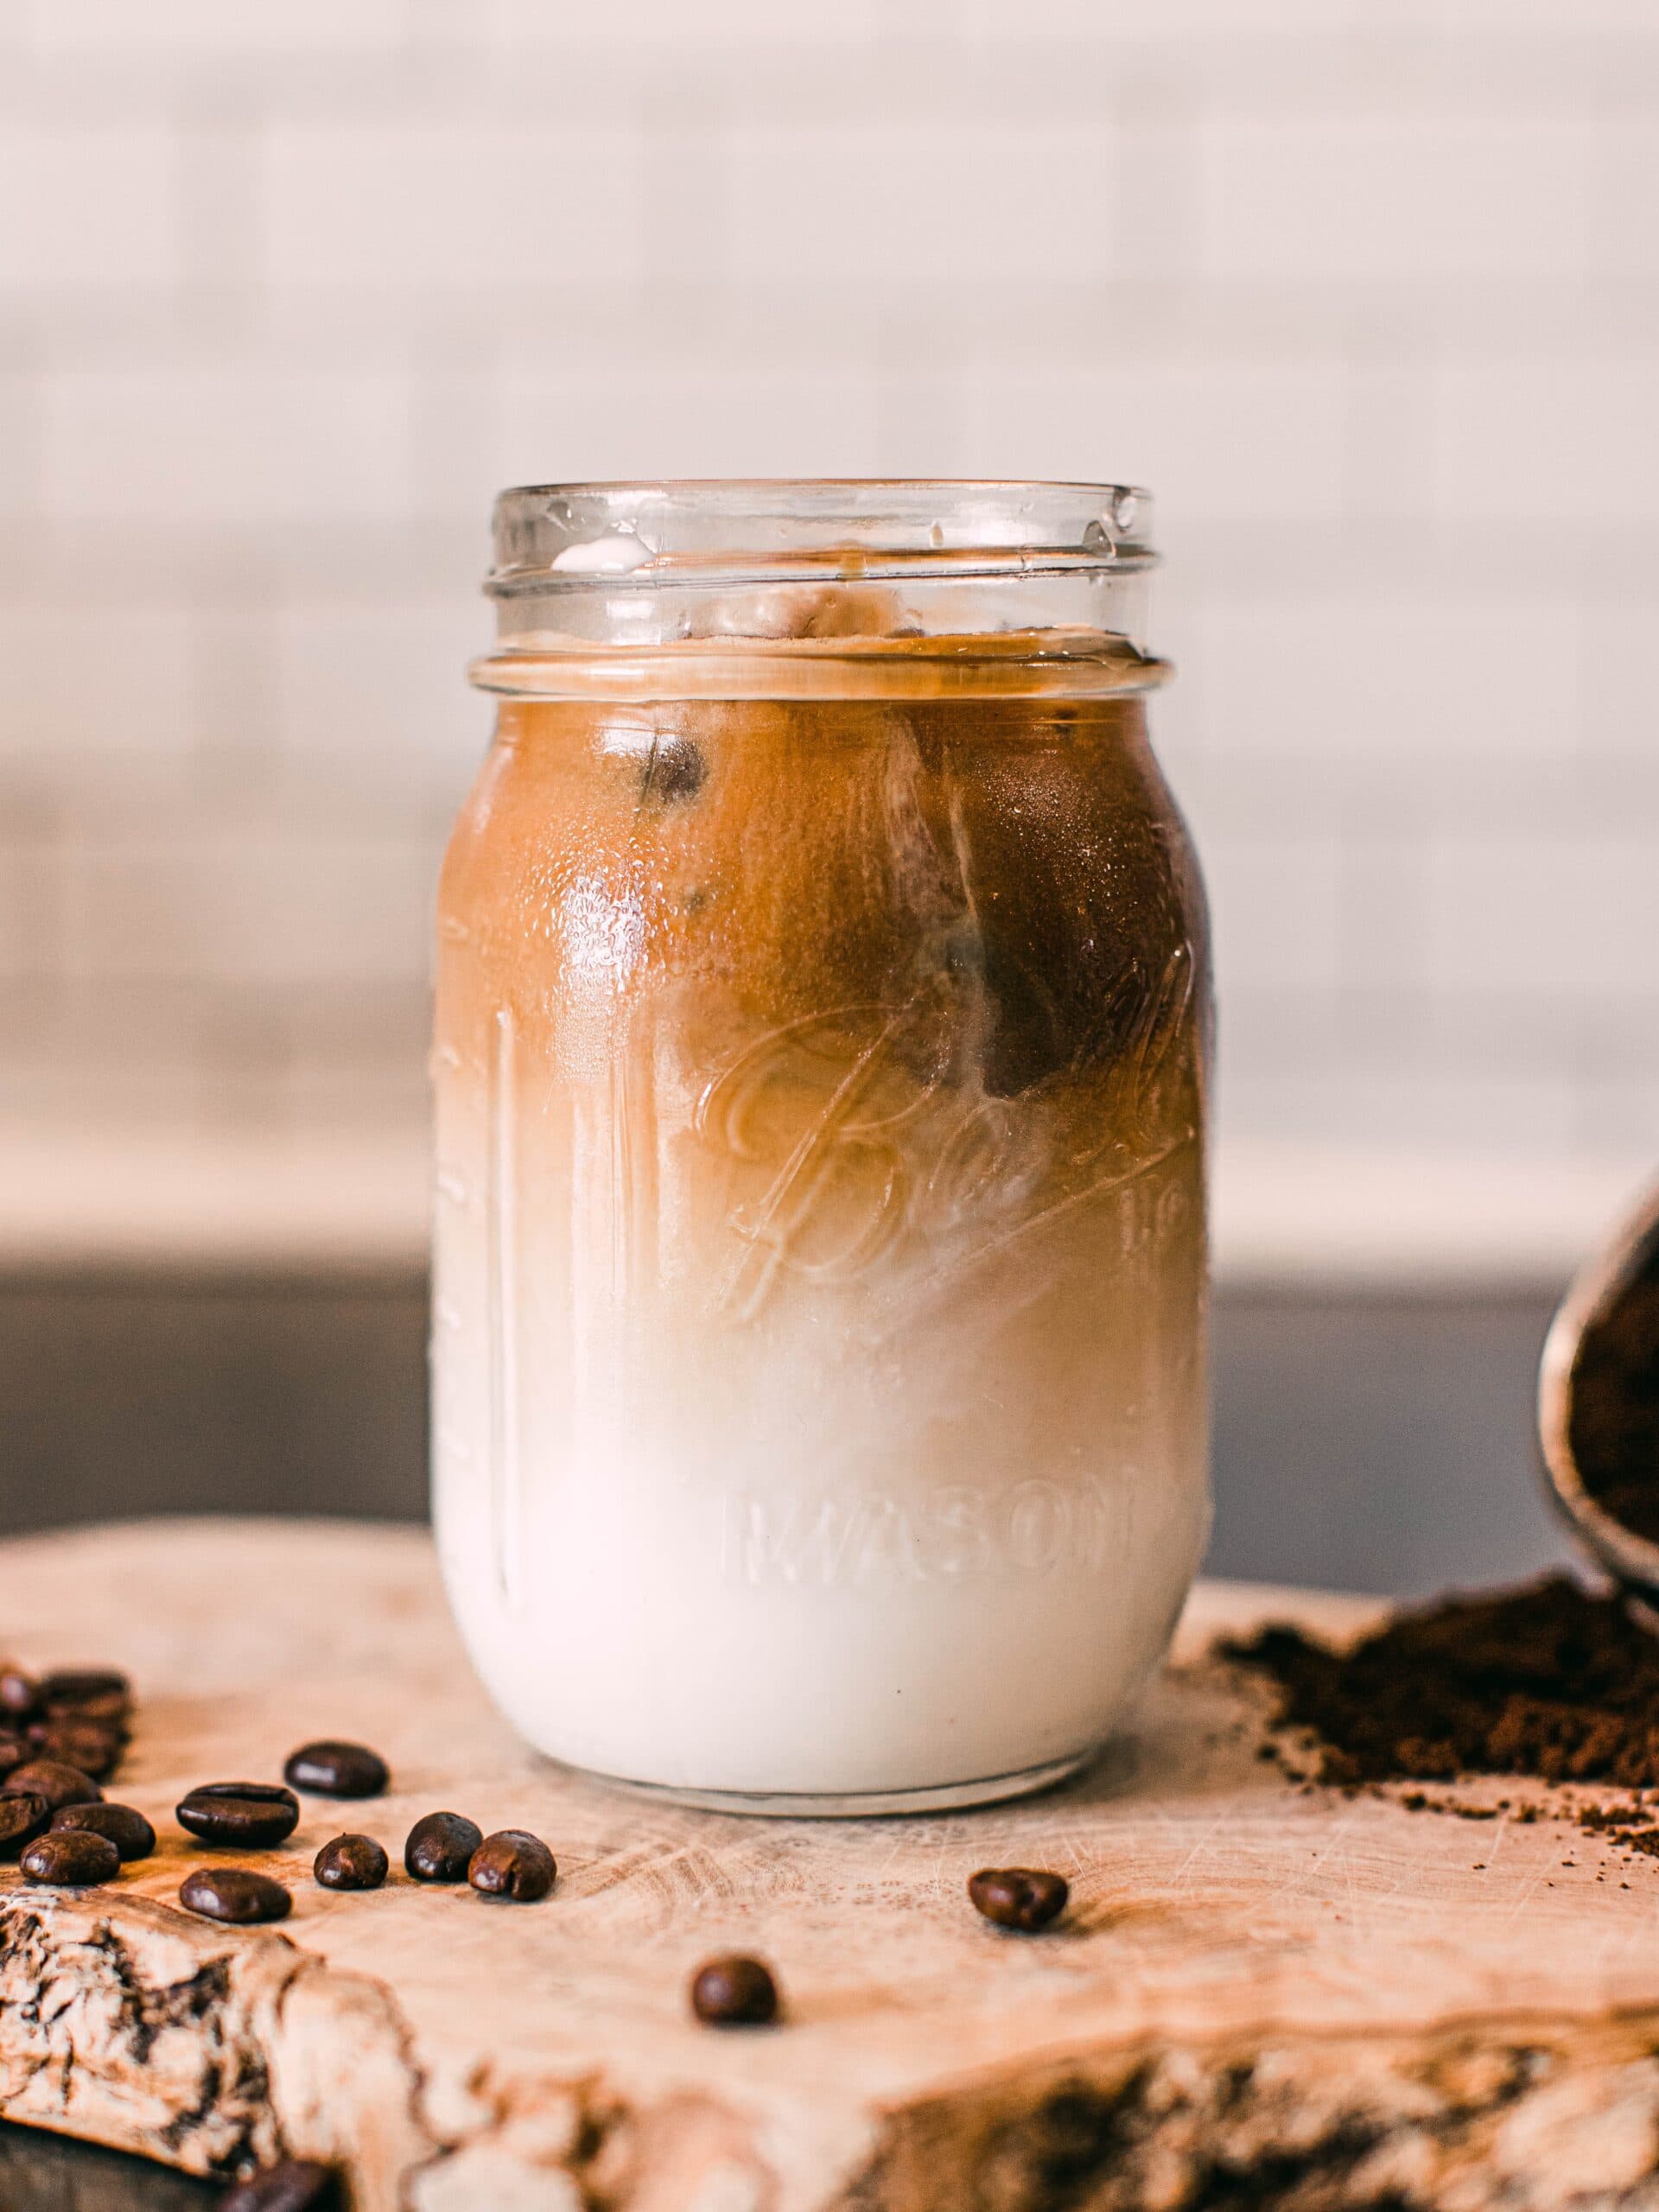 https://cdn.shopify.com/s/files/1/0814/5482/5753/files/mason-jar-regular-mouth-pint-with-coffee-cold-brew-and-milk-scaled.jpg